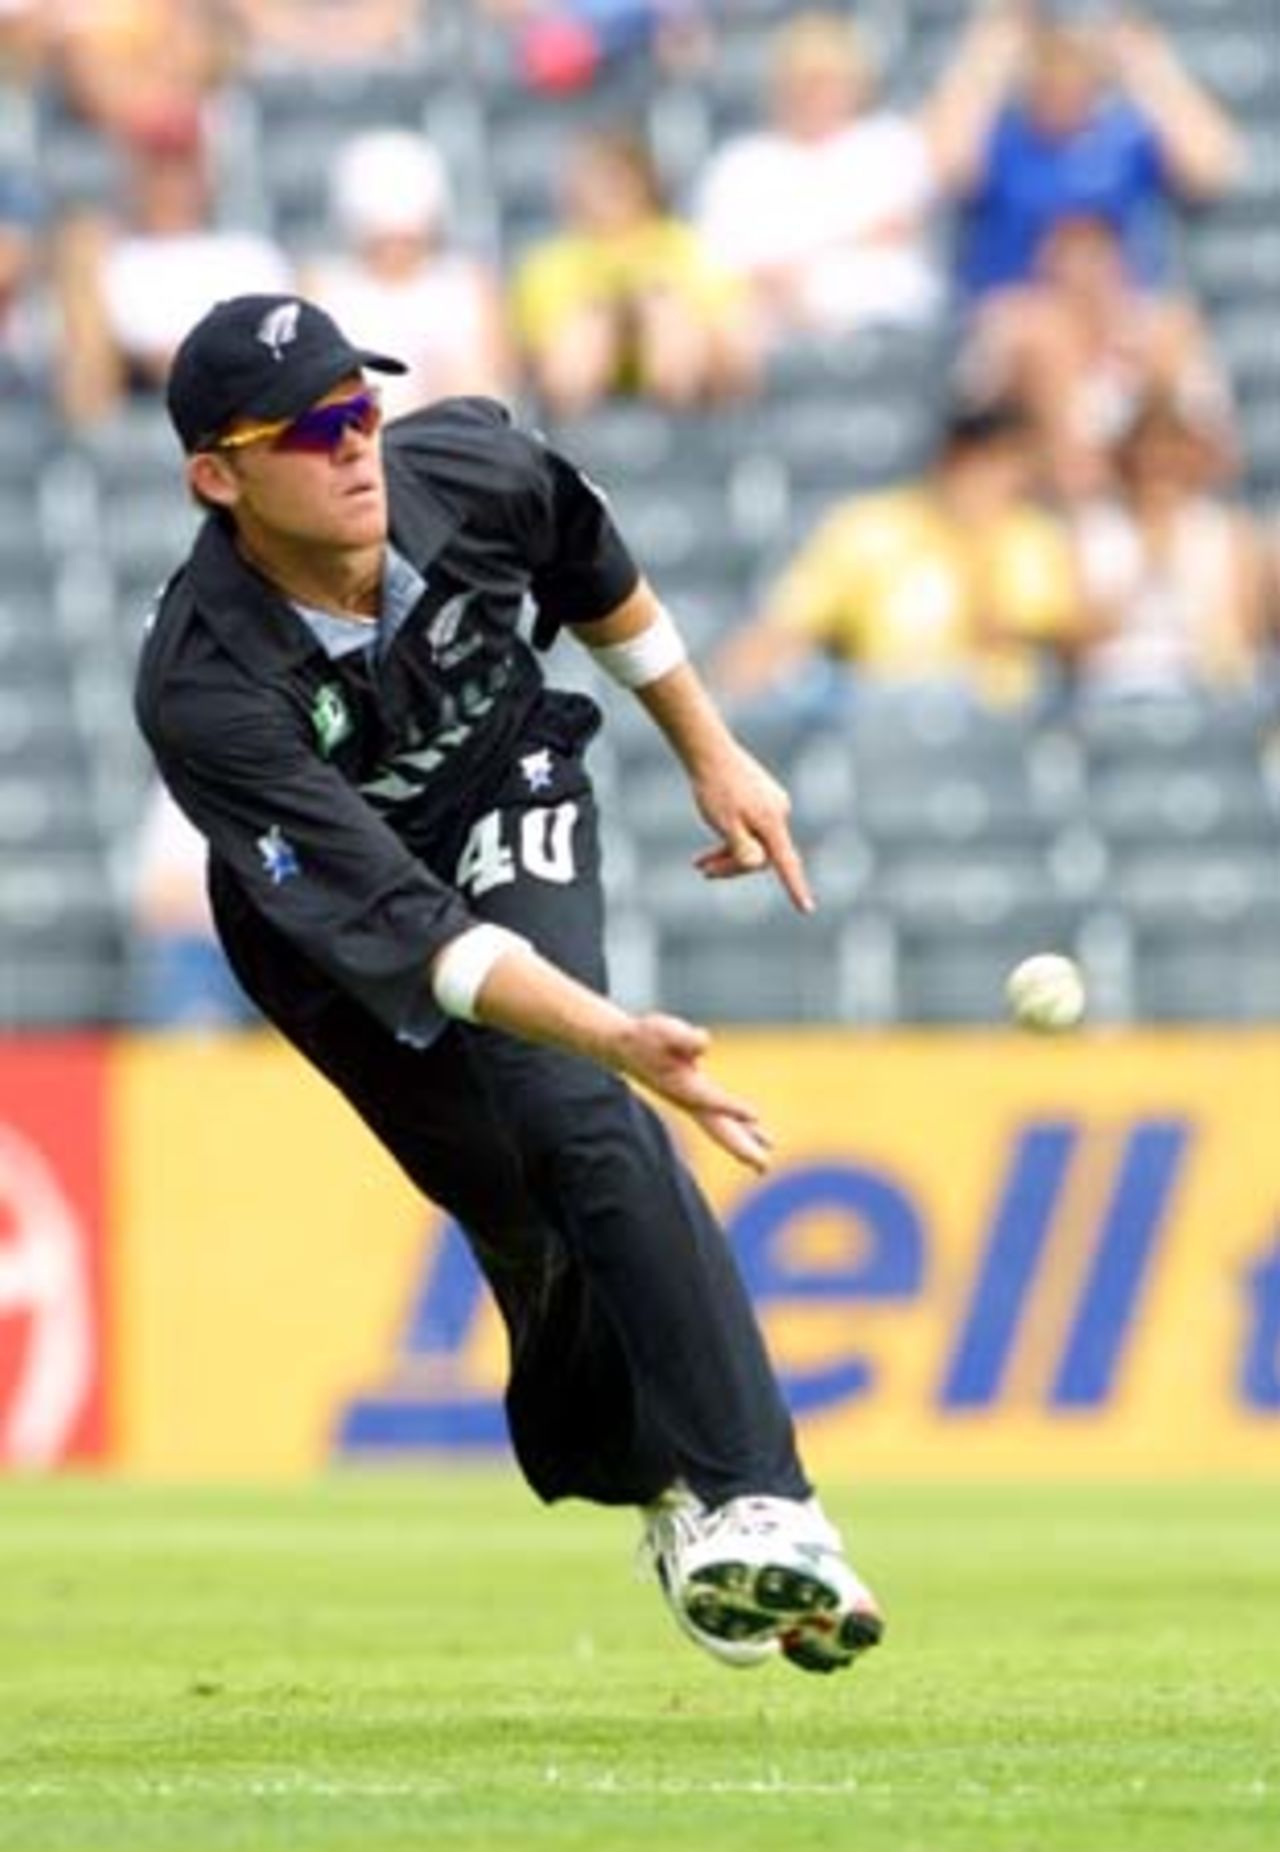 New Zealand fielder Lou Vincent sends in an under-arm return to the wicket-keeper as the Sri Lankan batsmen hurry through for a quick run. 5th One-Day International: New Zealand v Sri Lanka at Jade Stadium, Christchurch, 11 February 2001.